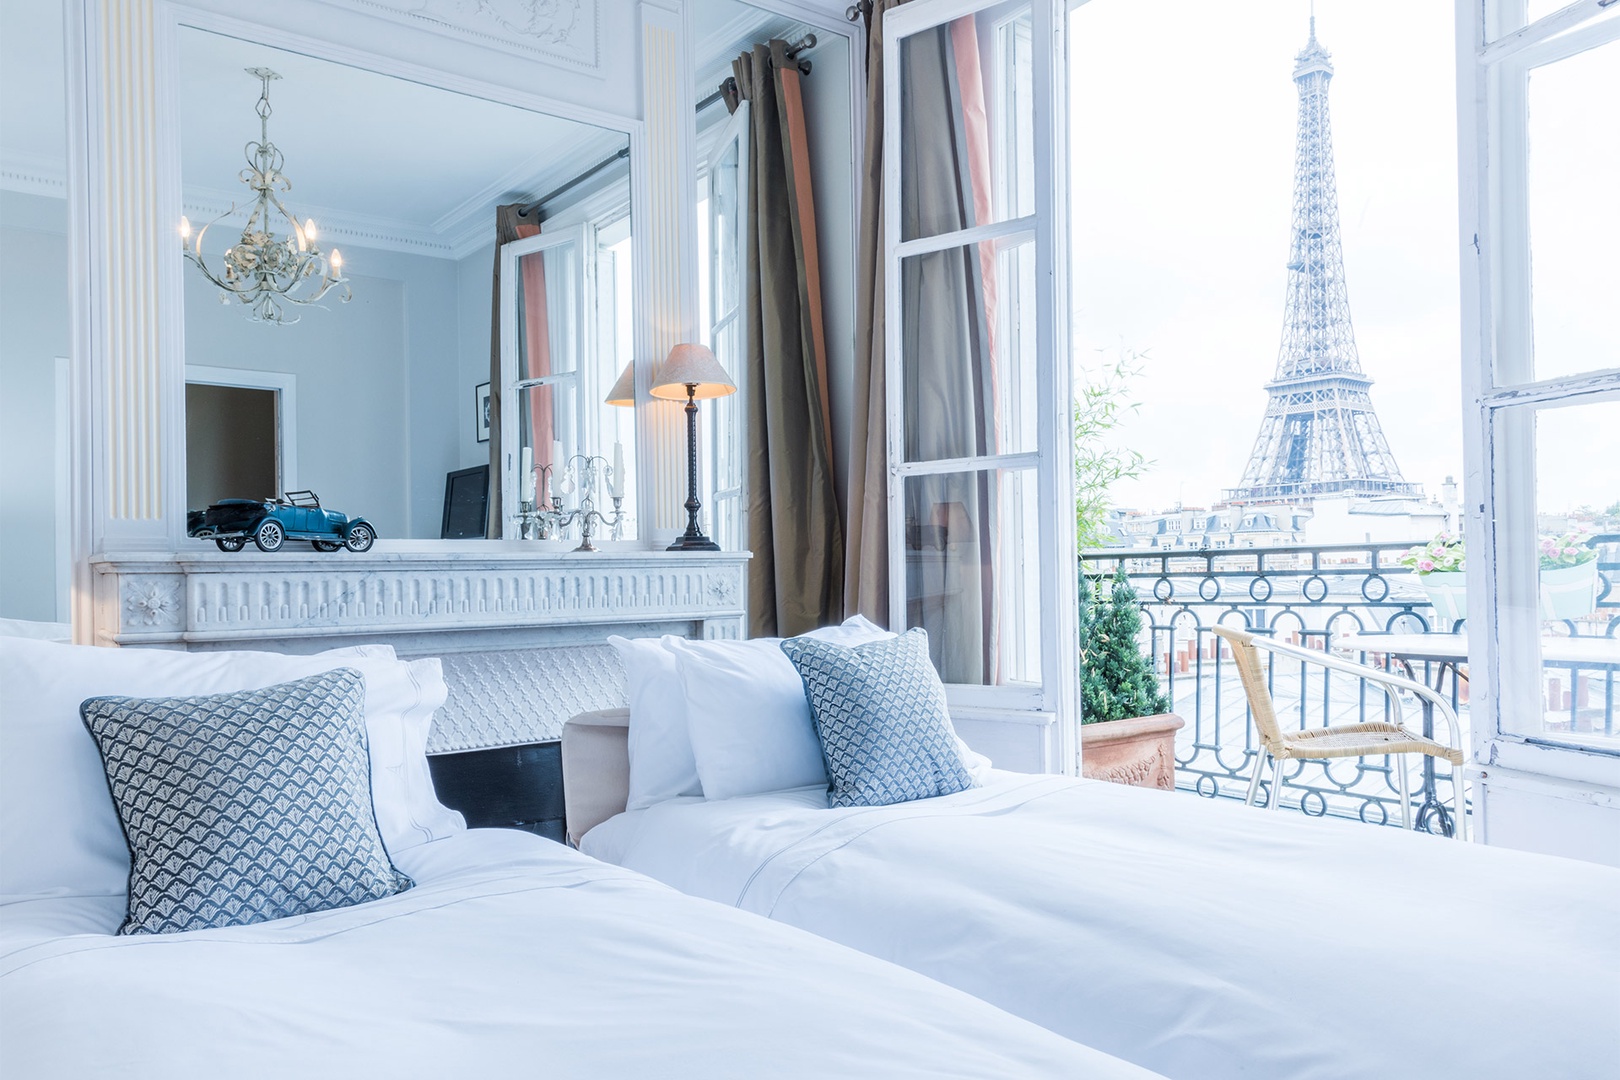 Wake up each morning to an incredible Eiffel Tower view.